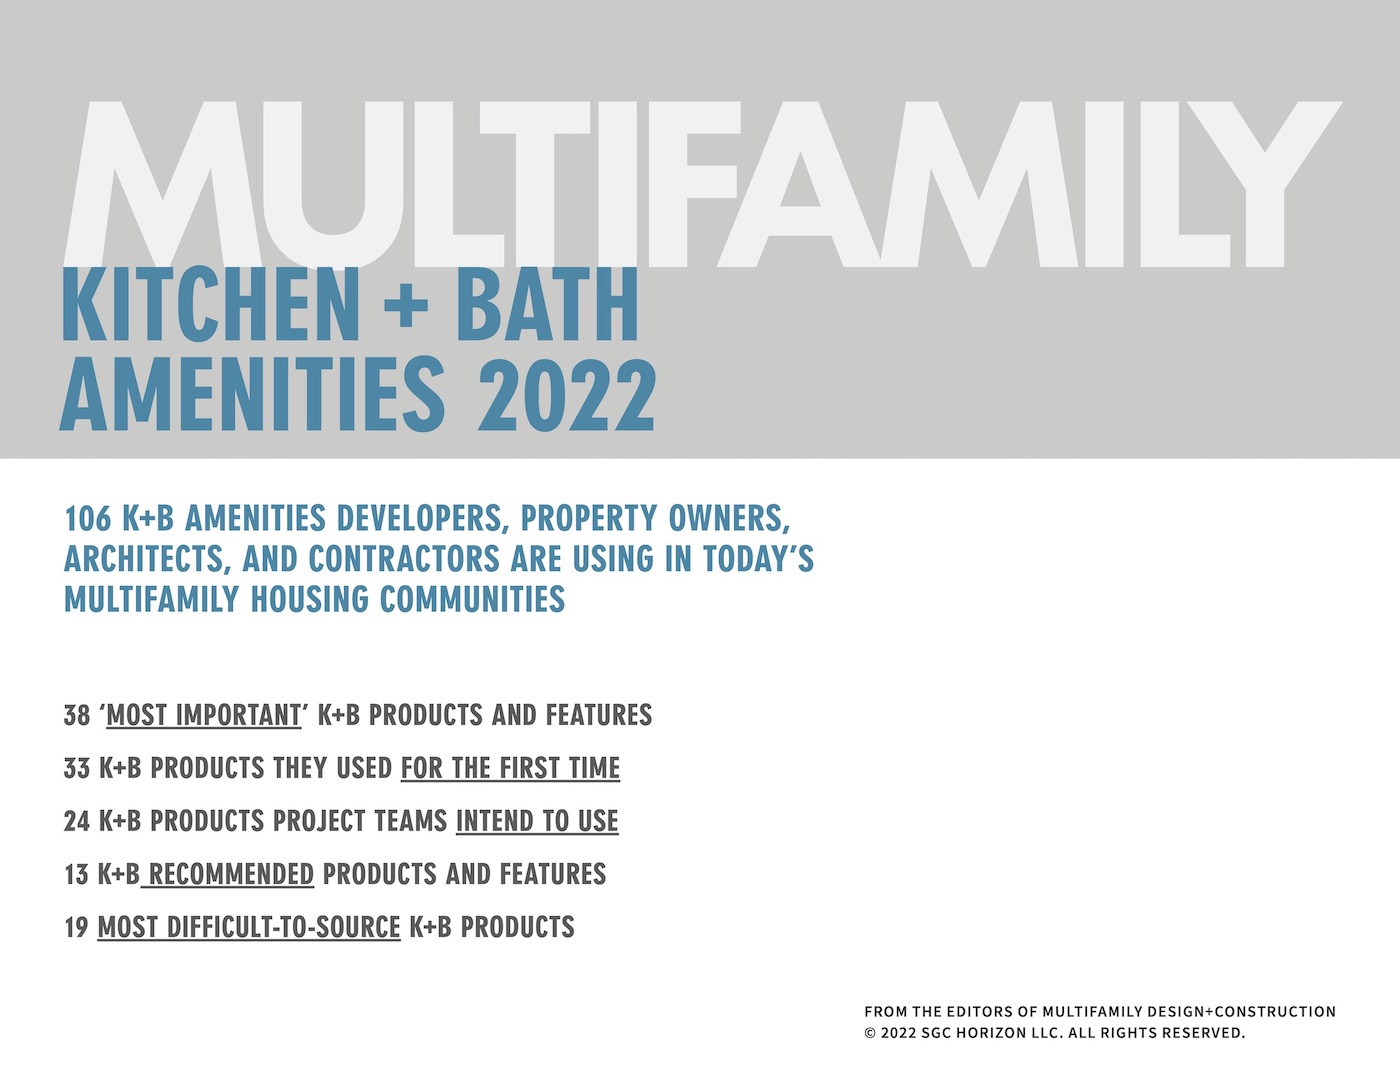 2022 Multifamily Kitchen and Bath Amenities Survey